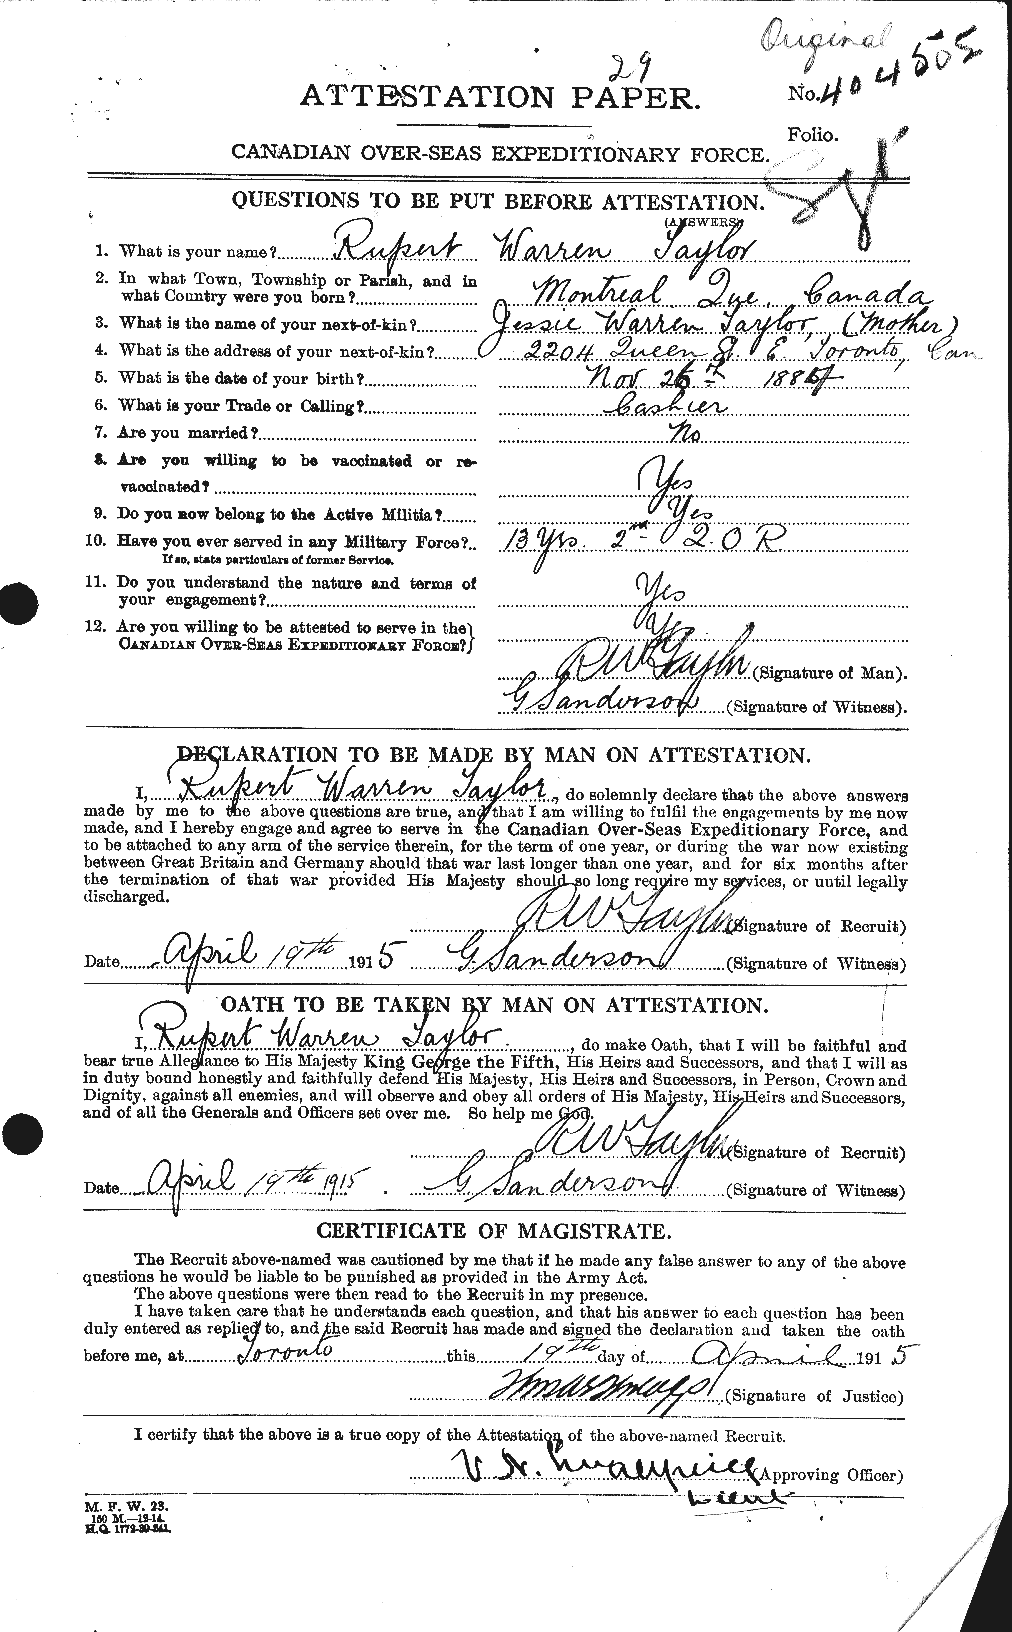 Personnel Records of the First World War - CEF 627538a